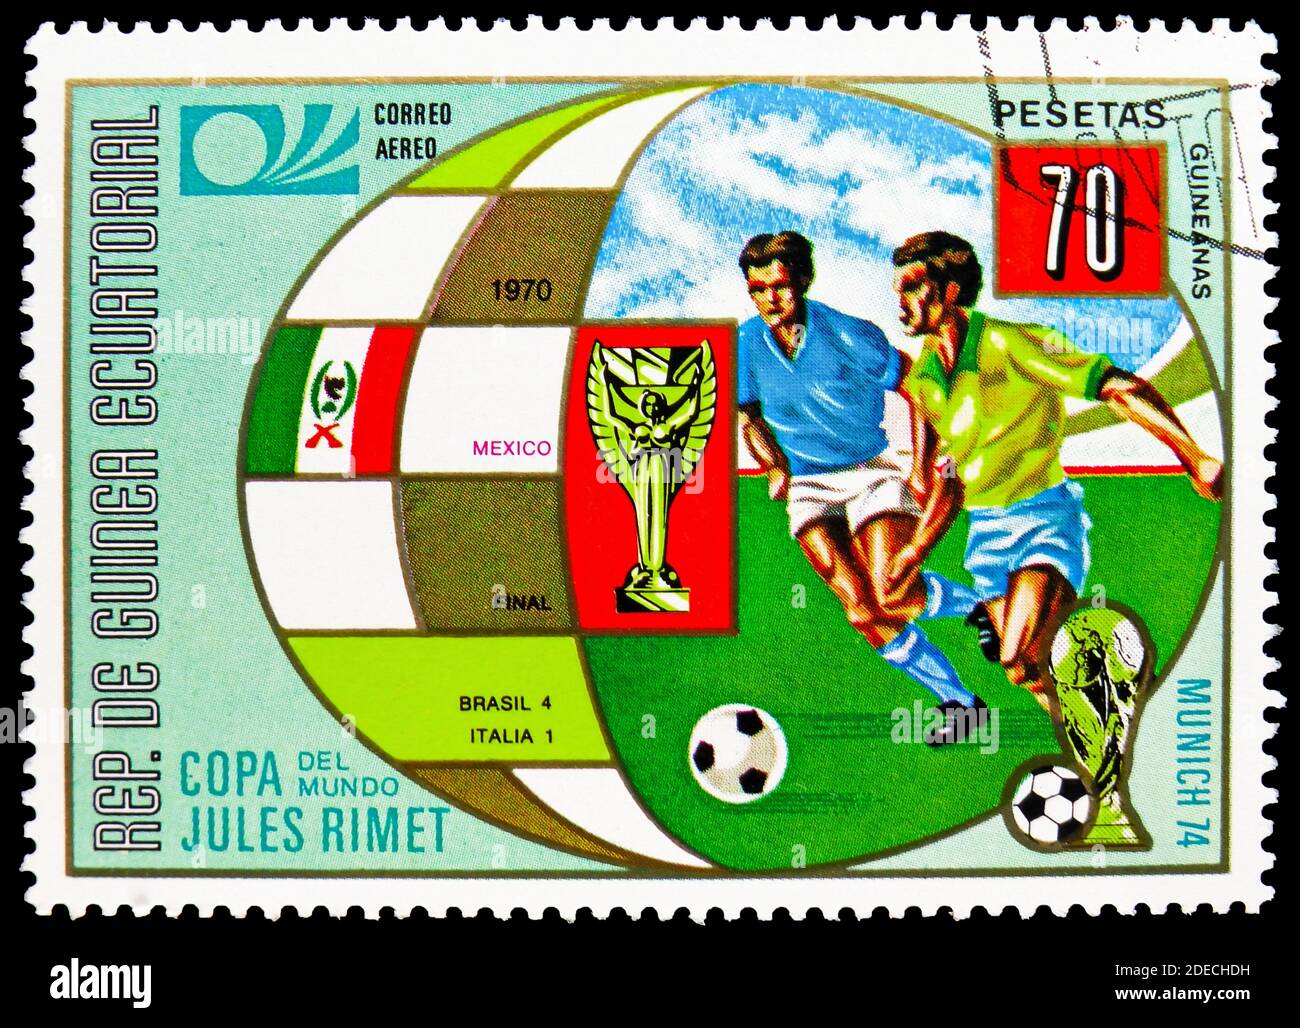 MOSCOW, RUSSIA - OCTOBER 17, 2020: Postage stamp printed in Equatorial Guinea shows Mexico city, Football World Cup 1974, Germany: Earlier World Cup f Stock Photo